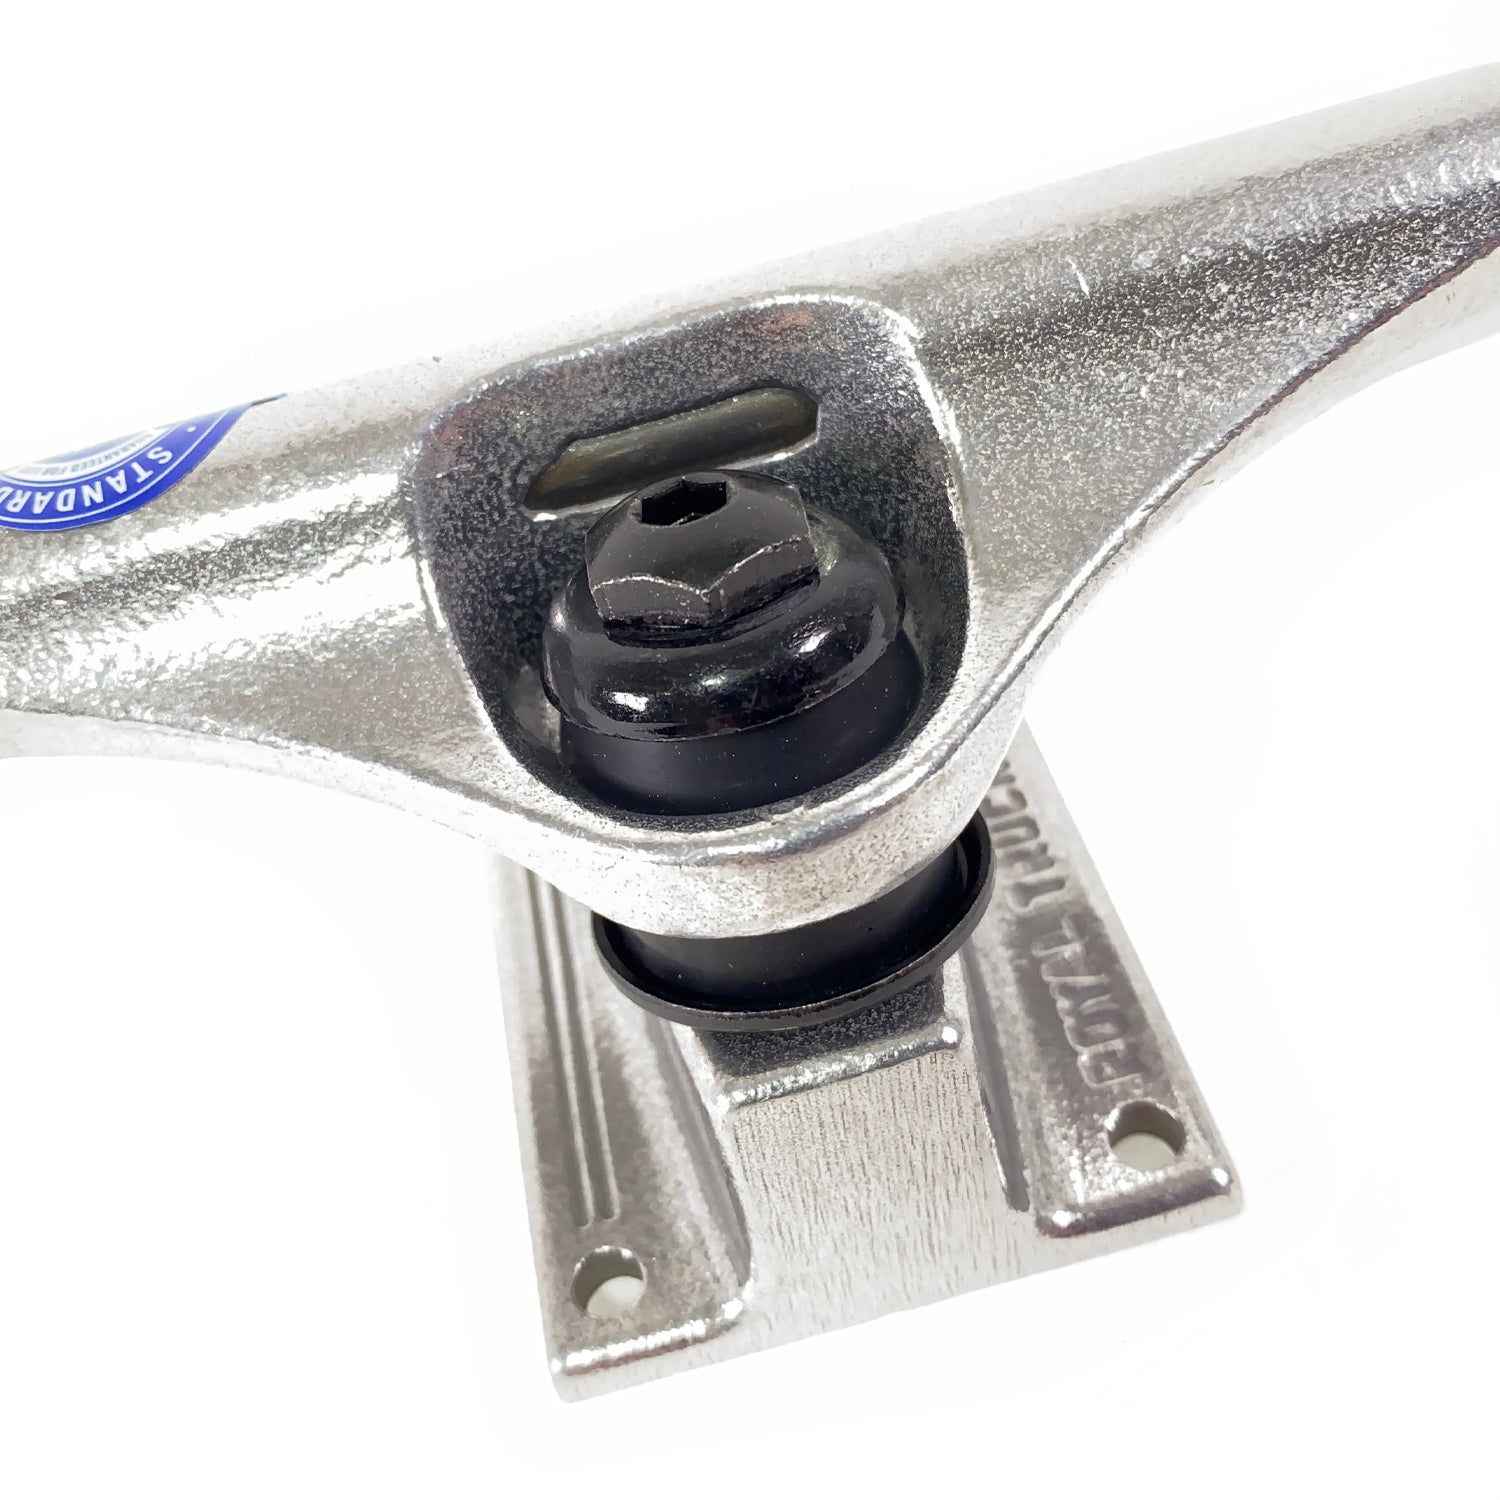 Royal Skateboard Truck with Inverted Kingpin 5.0 (7.75) - Raw Silver (Sold as a pair) - Prime Delux Store